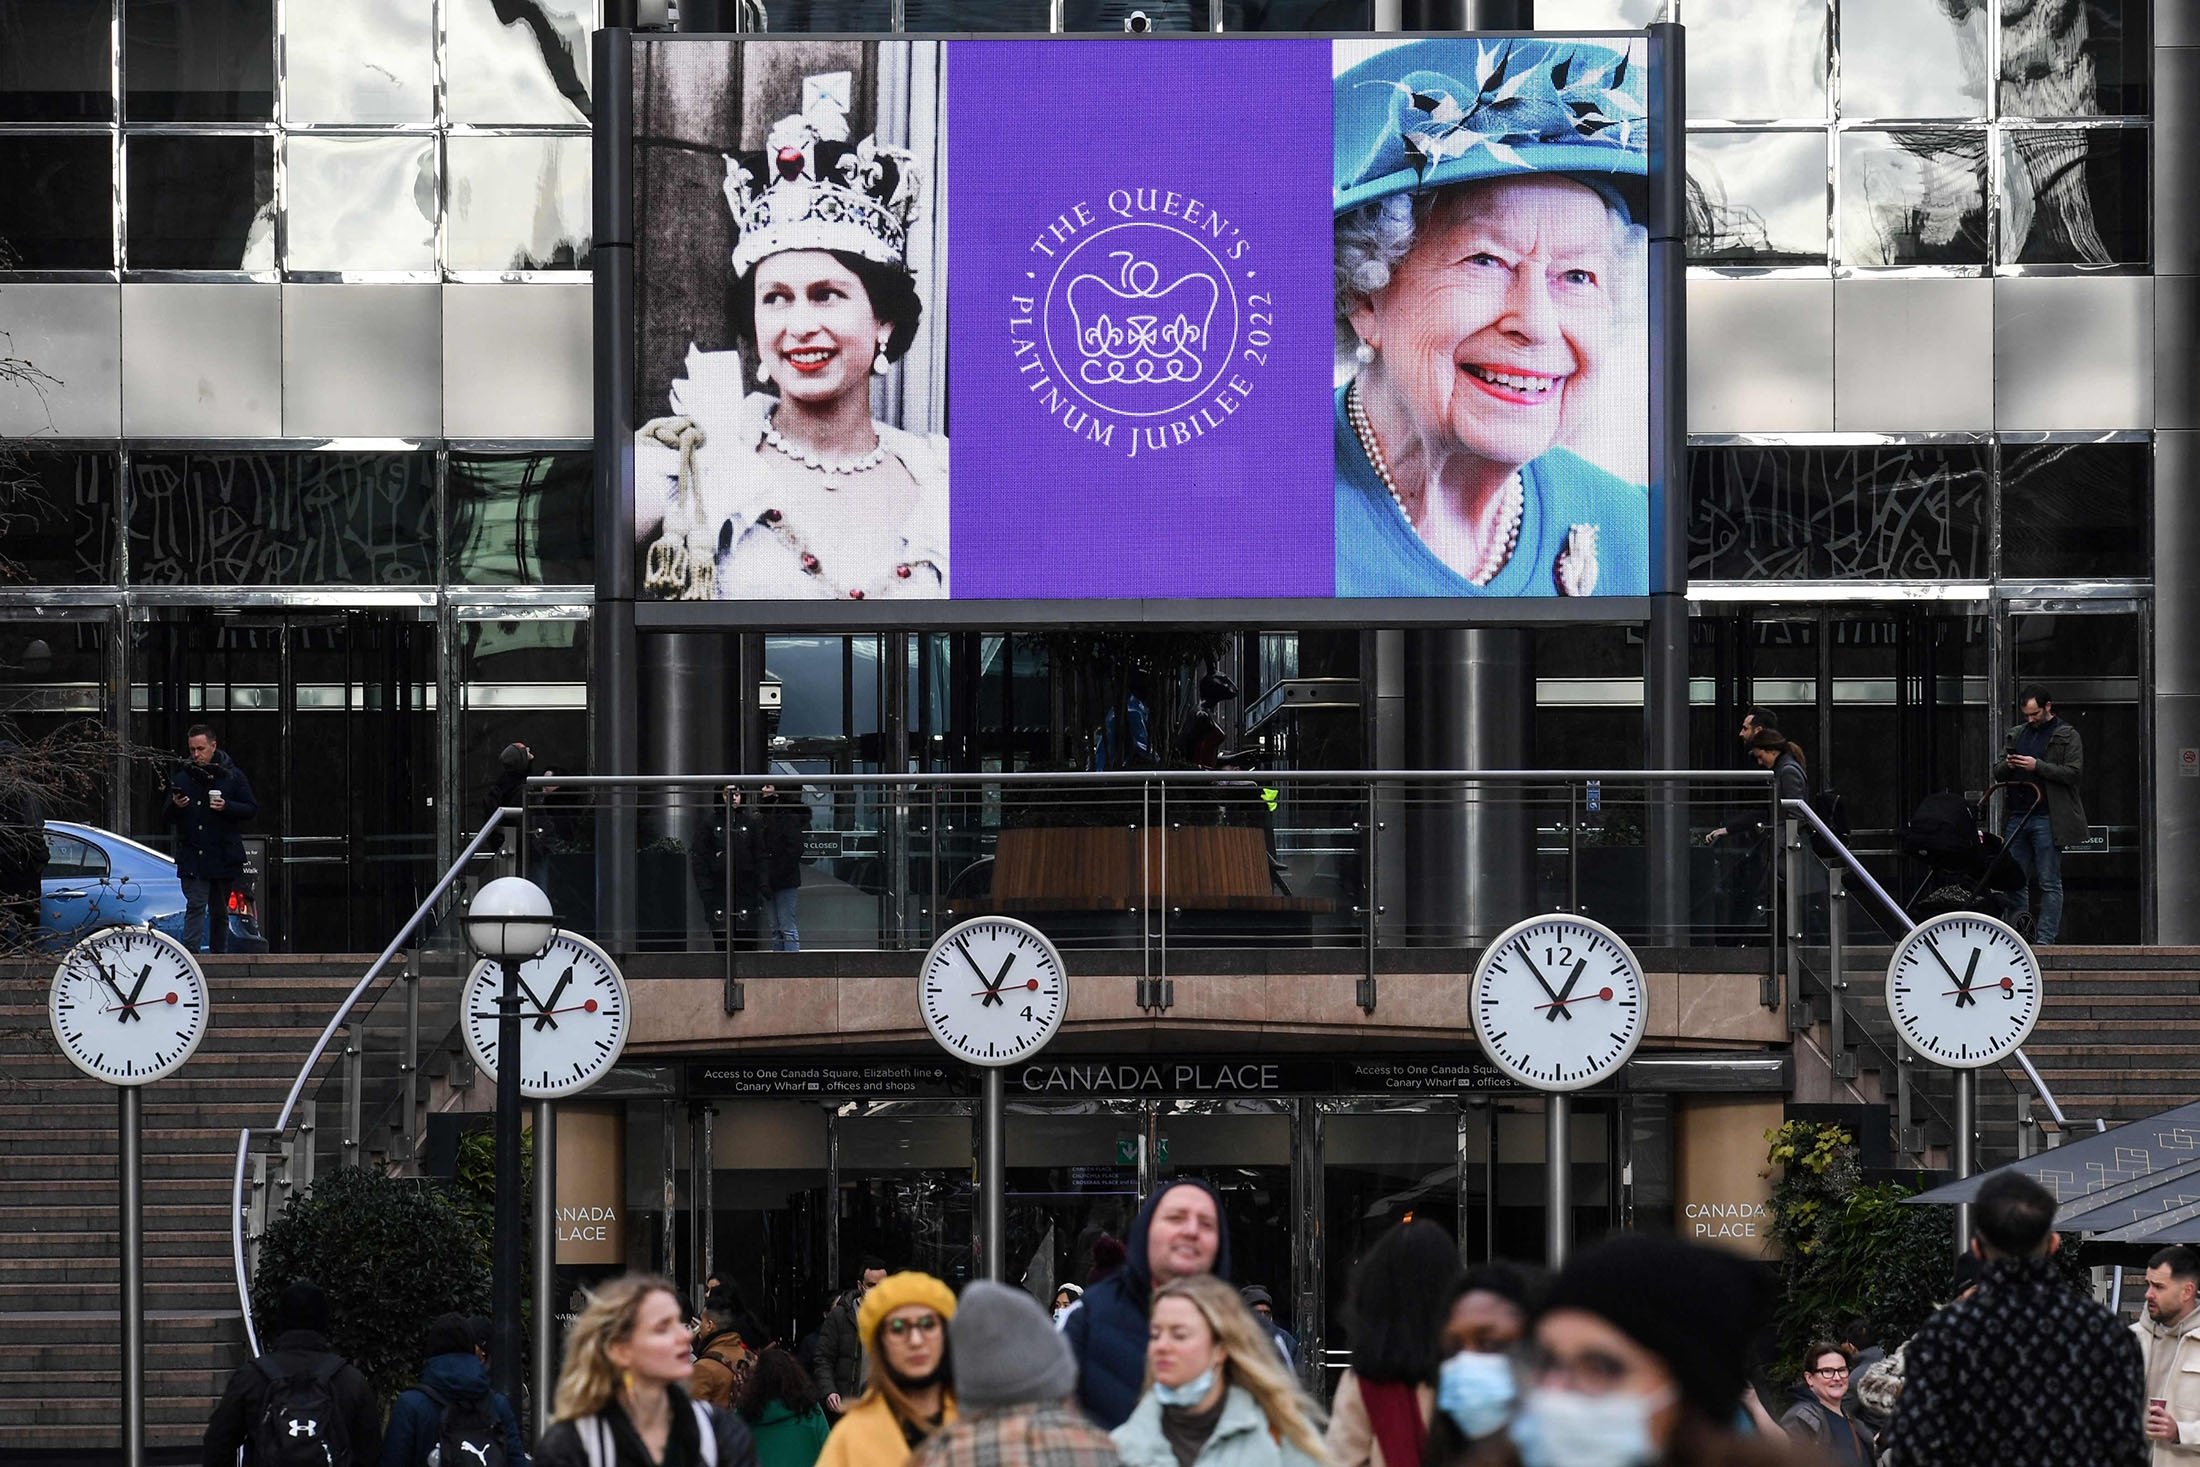 Images of Britain's Queen Elizabeth II are displayed on a digital screen at the Canary Wharf district, in London, U.K., Feb. 6, 2022. (AFP Photo)